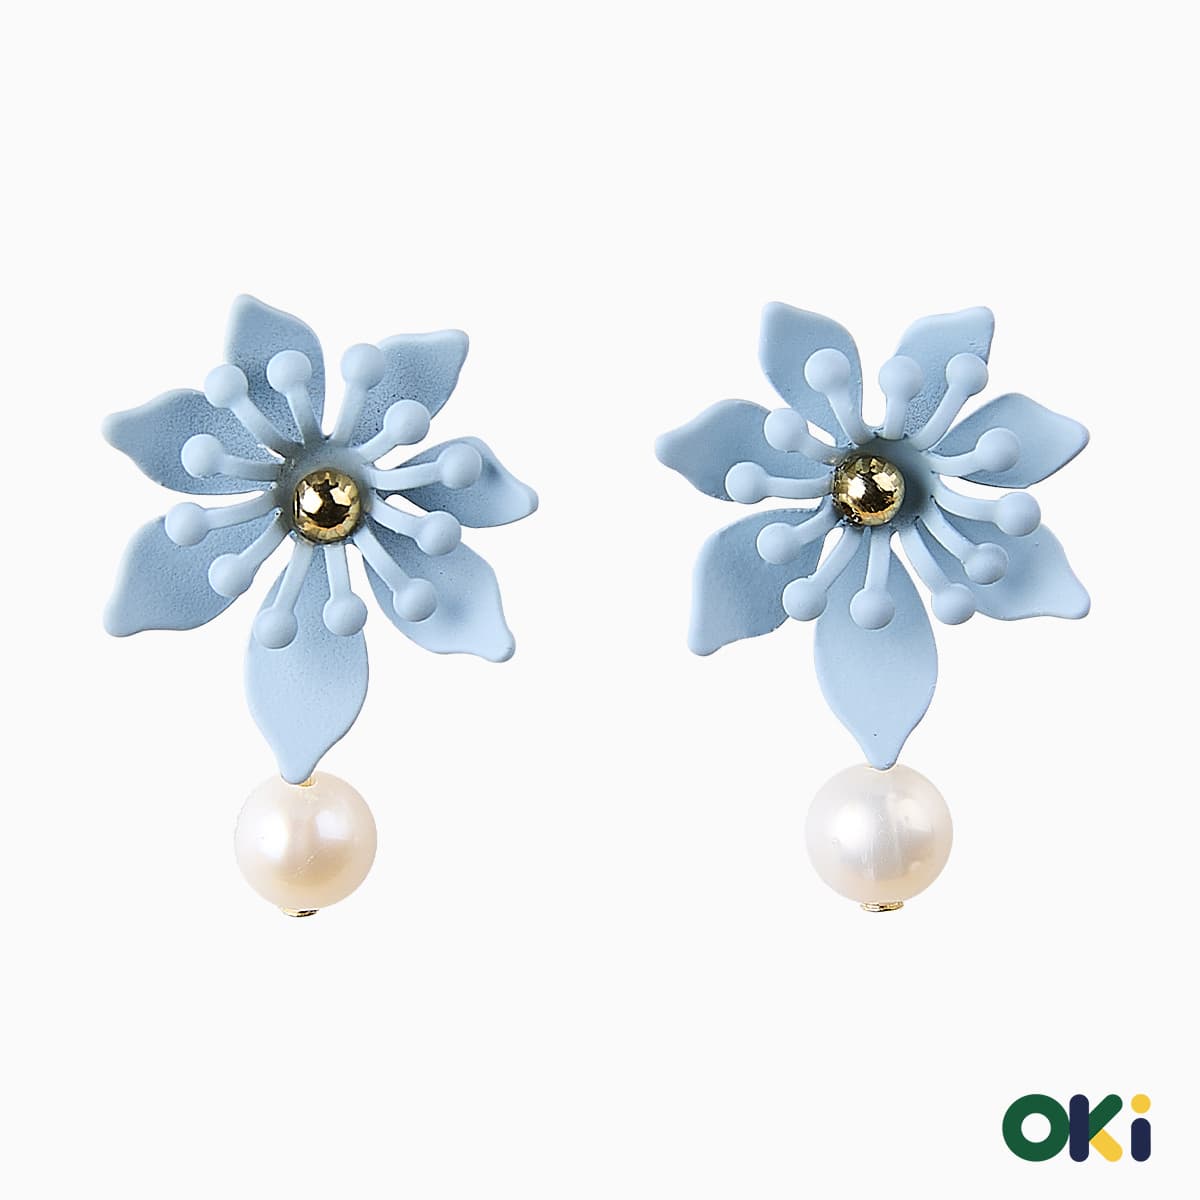 Bloom earrings OKi Fashion accessories jewely hypoallergenic